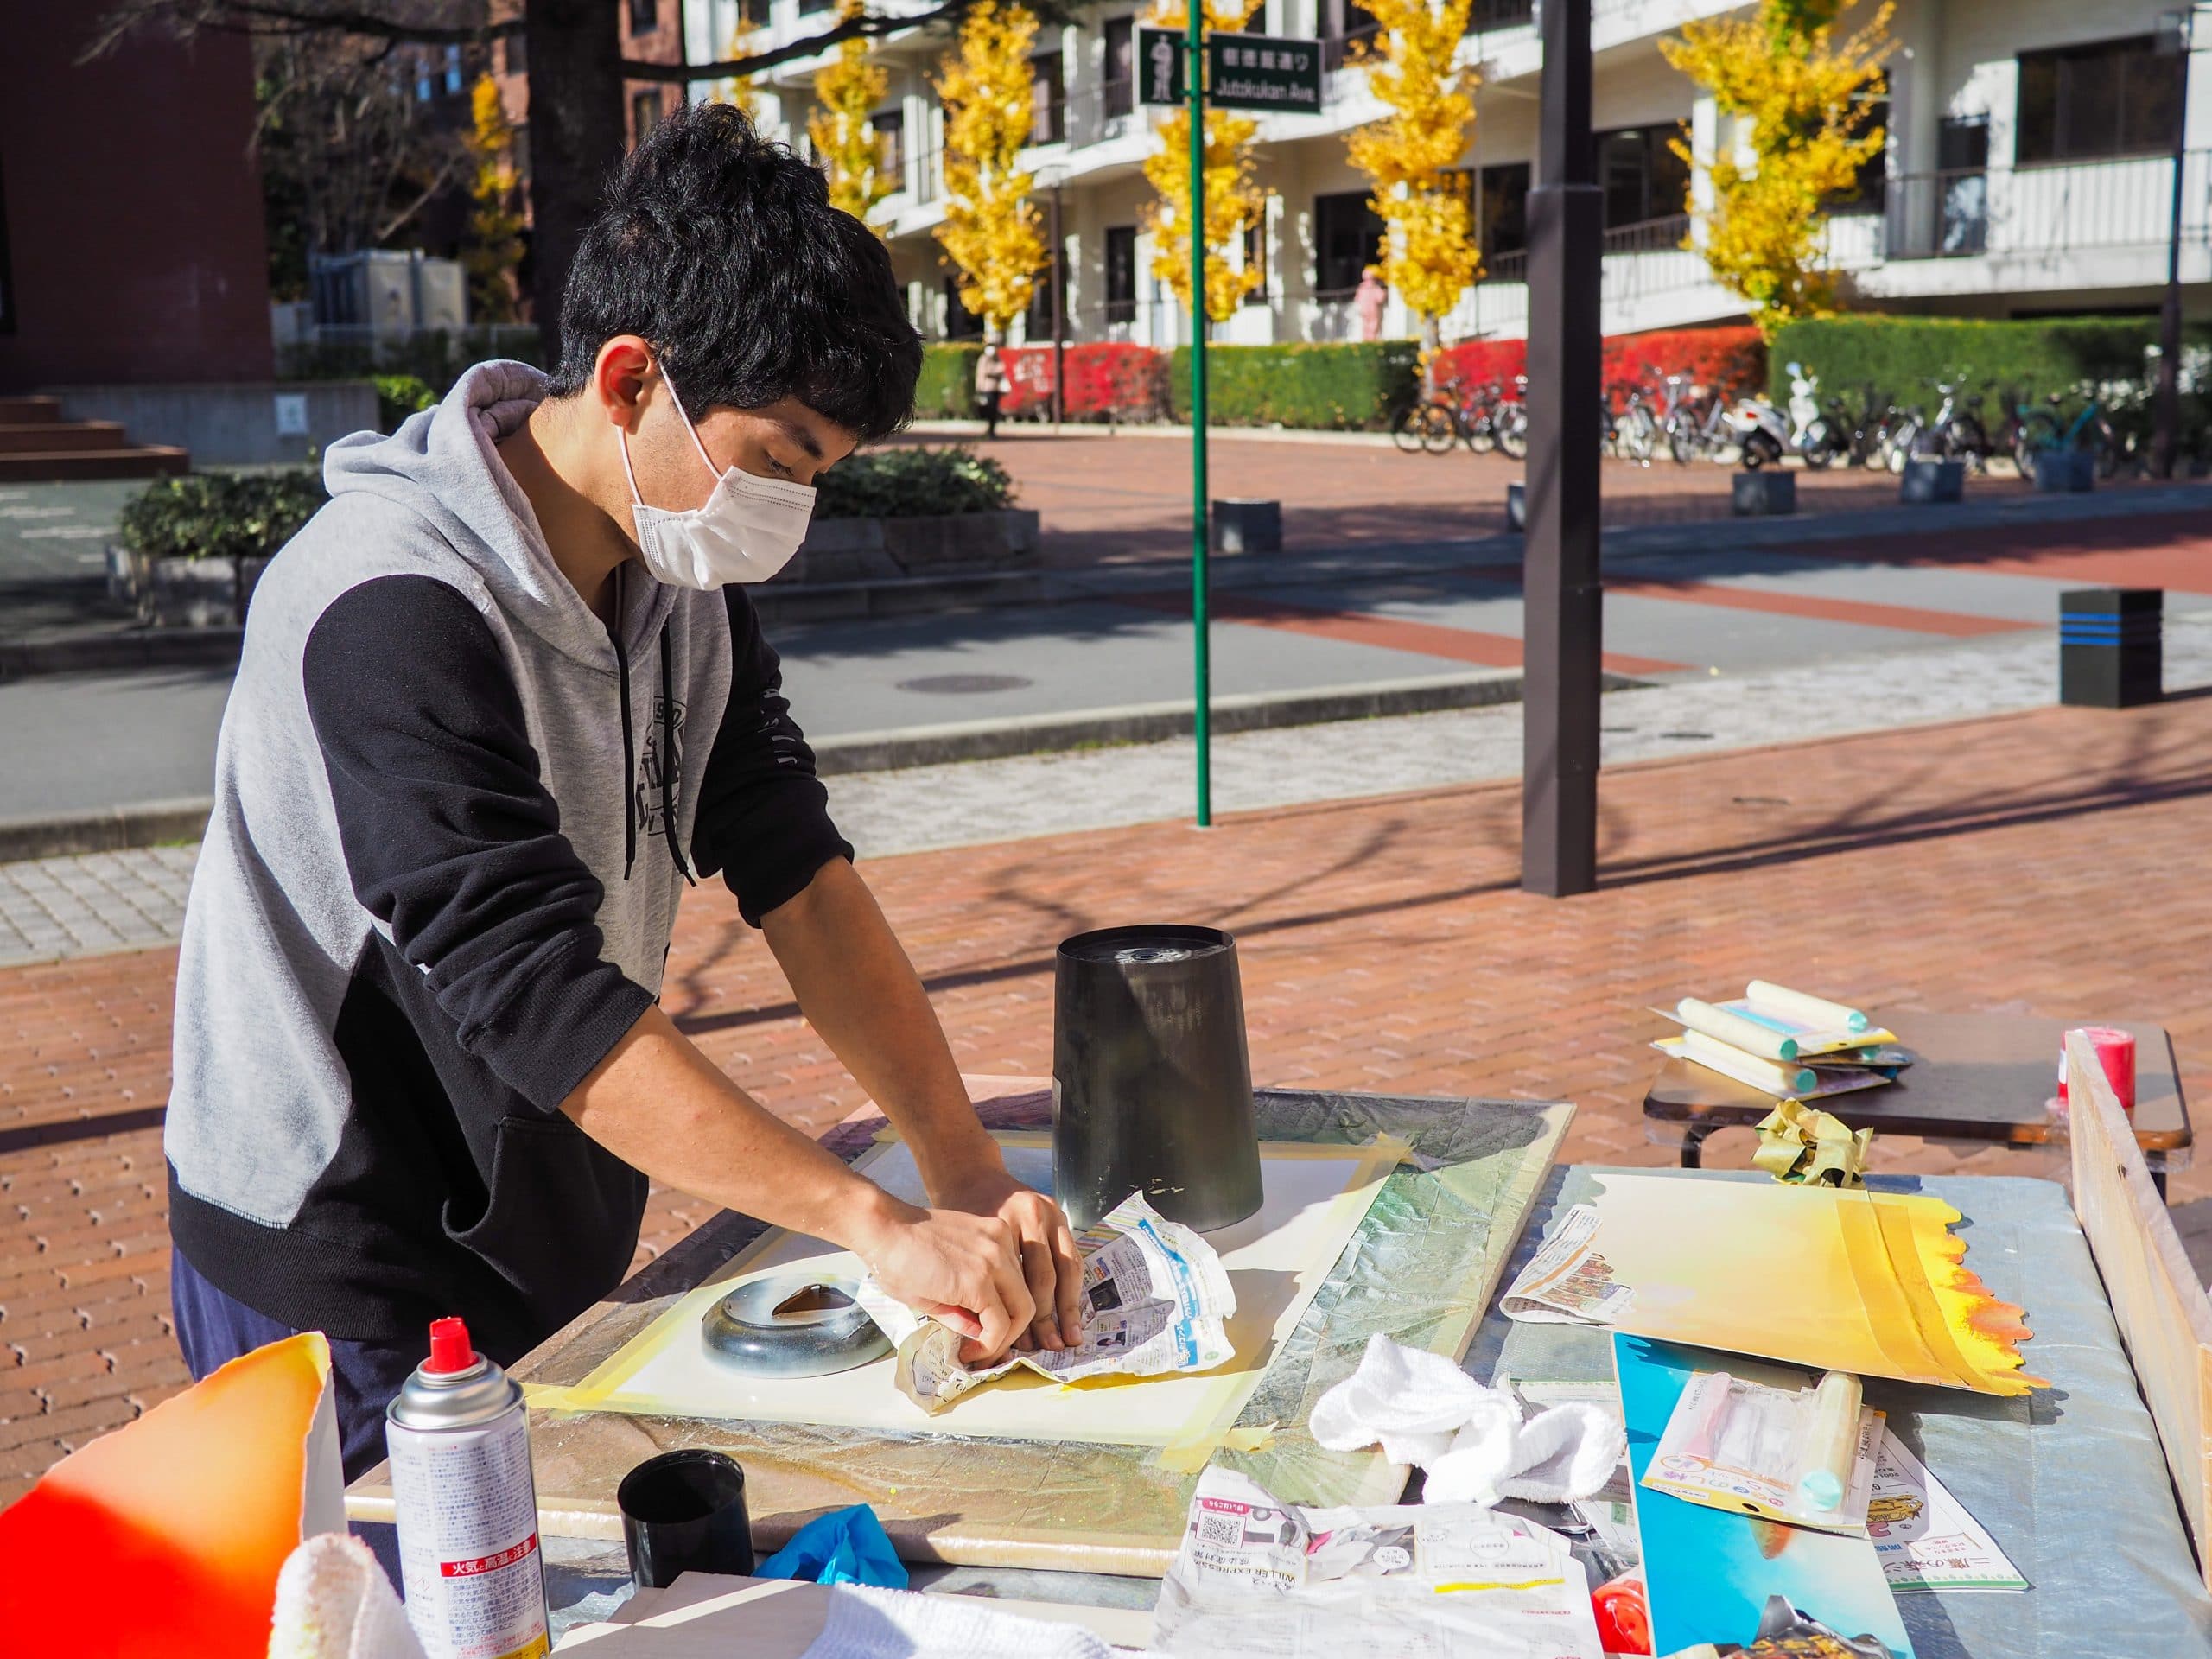 iCLA student works with spray paint